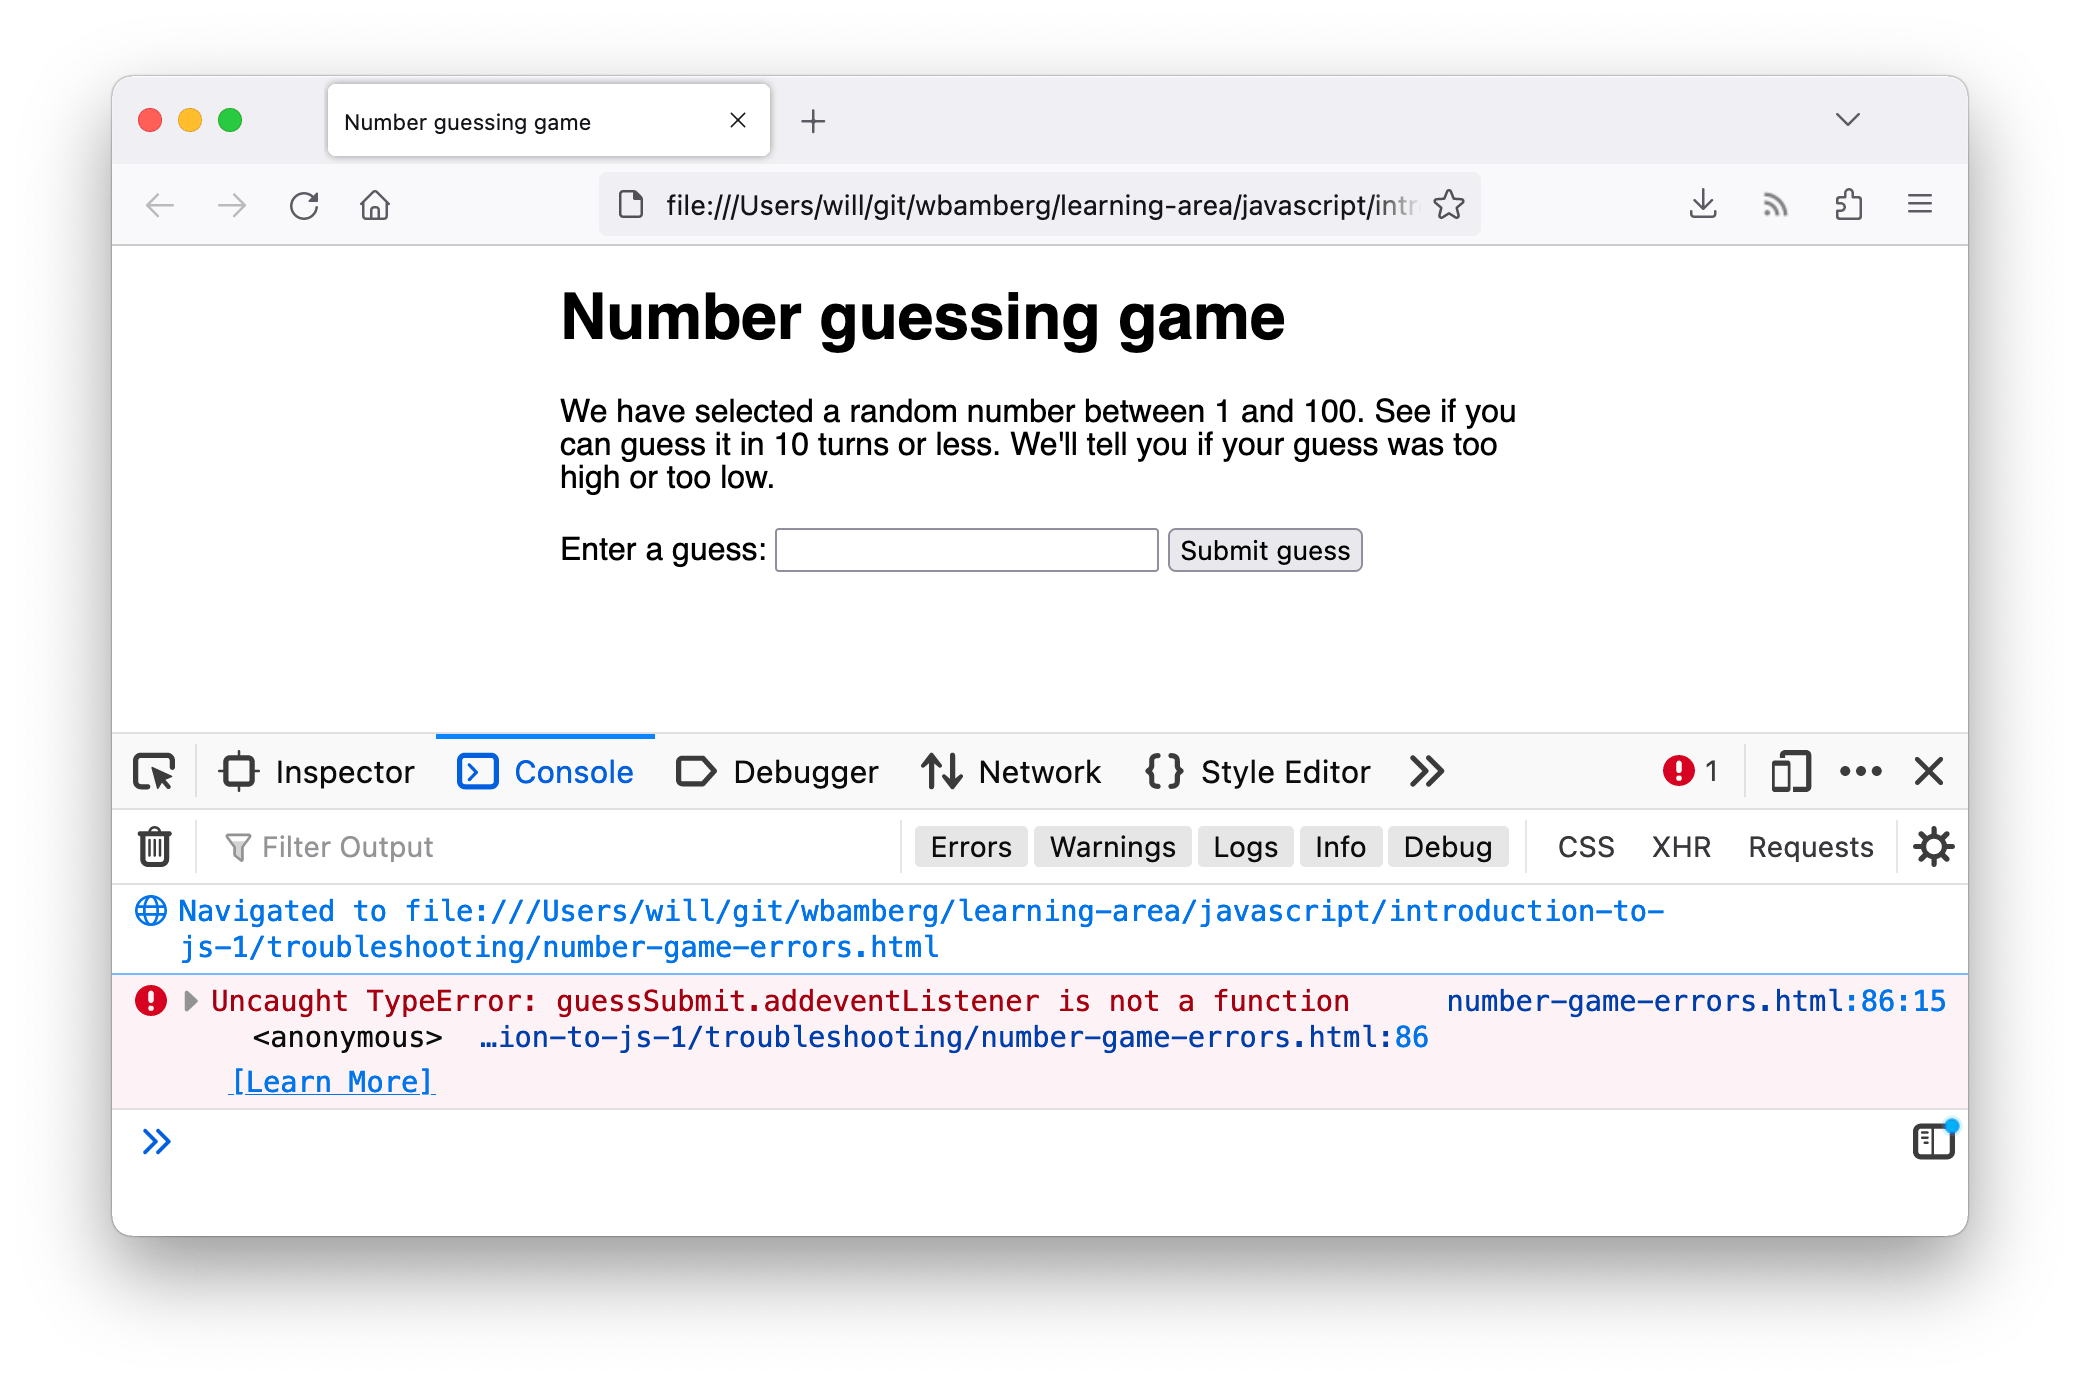 "Number guessing game" demo page in Firefox. One error is visible in the JavaScript console: "X TypeError: guessSubmit.addeventListener is not a function [Learn More] (number-game-errors.html:86:3)".